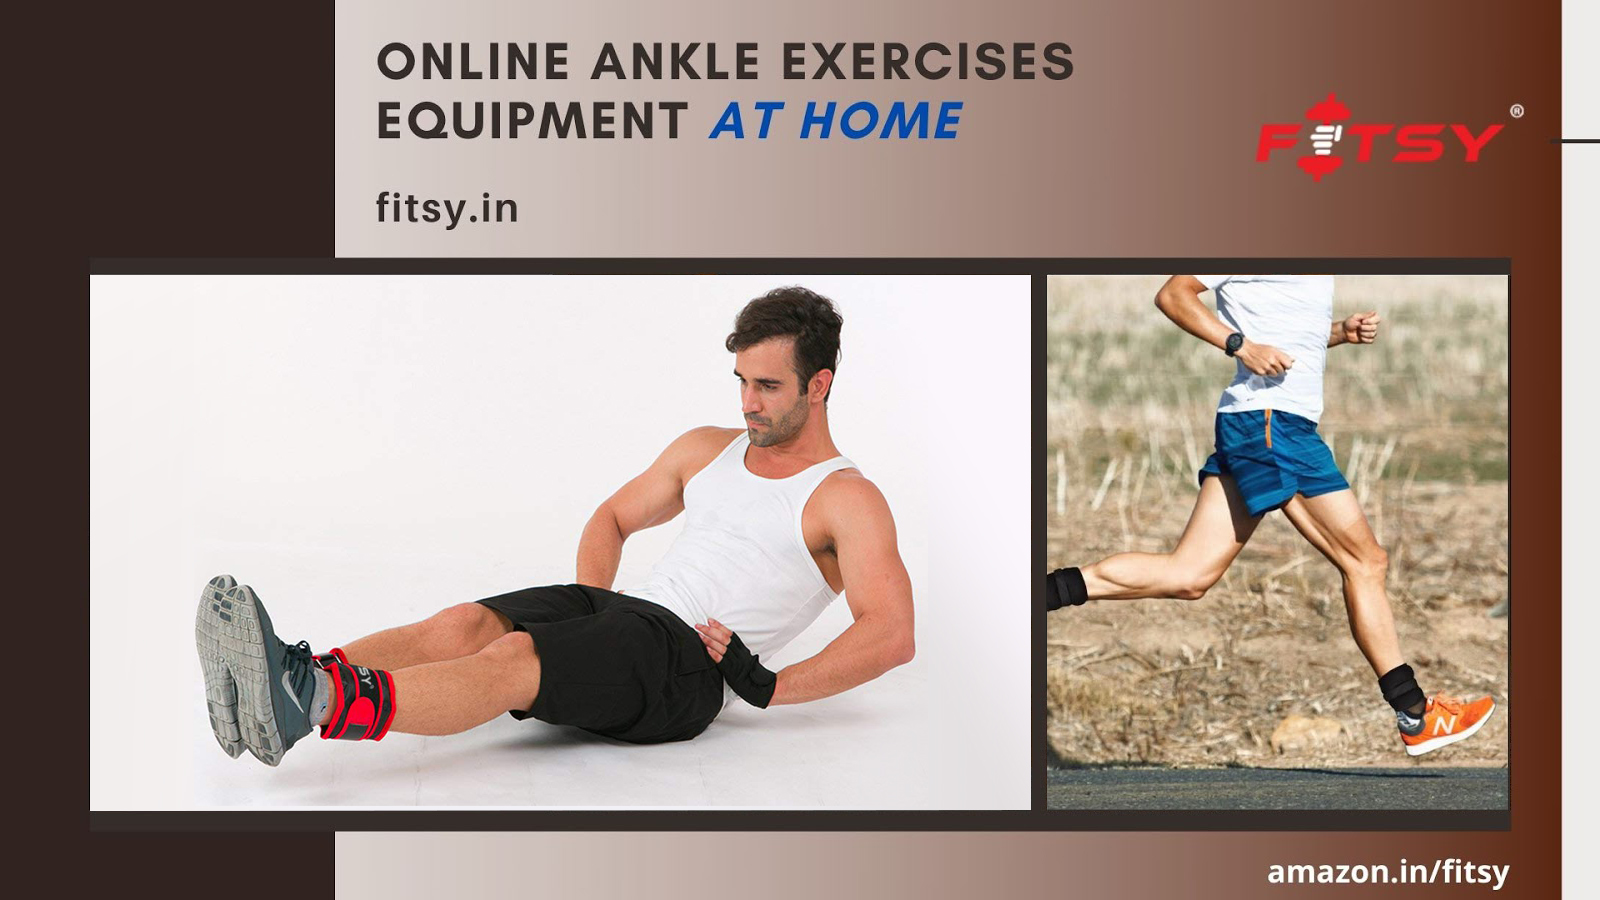 Purchase Online Ankle Exercises Equipment for Strength Training at Home